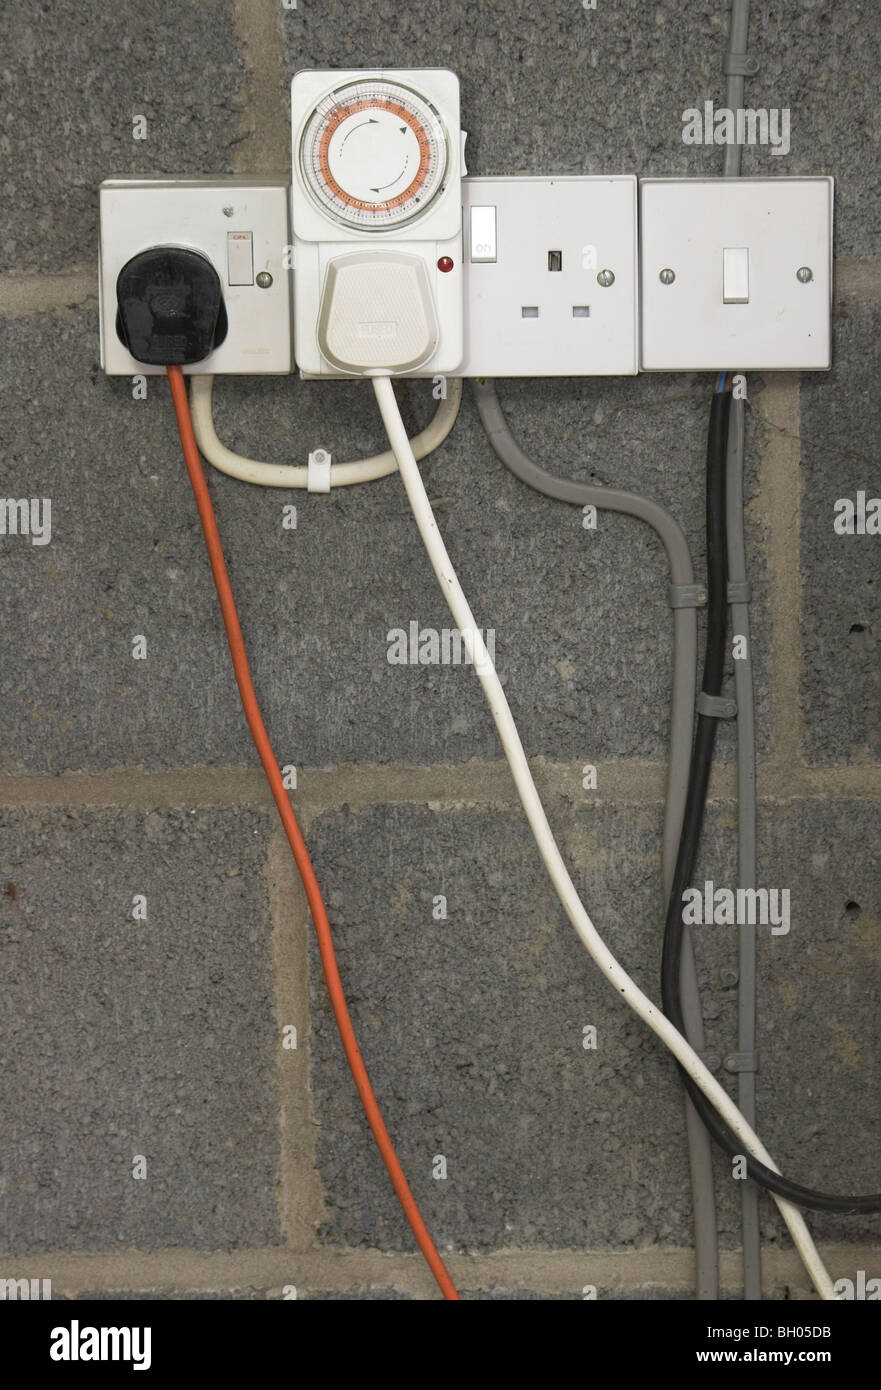 Electrical sockets and plugs on a garage wall Stock Photo - Alamy